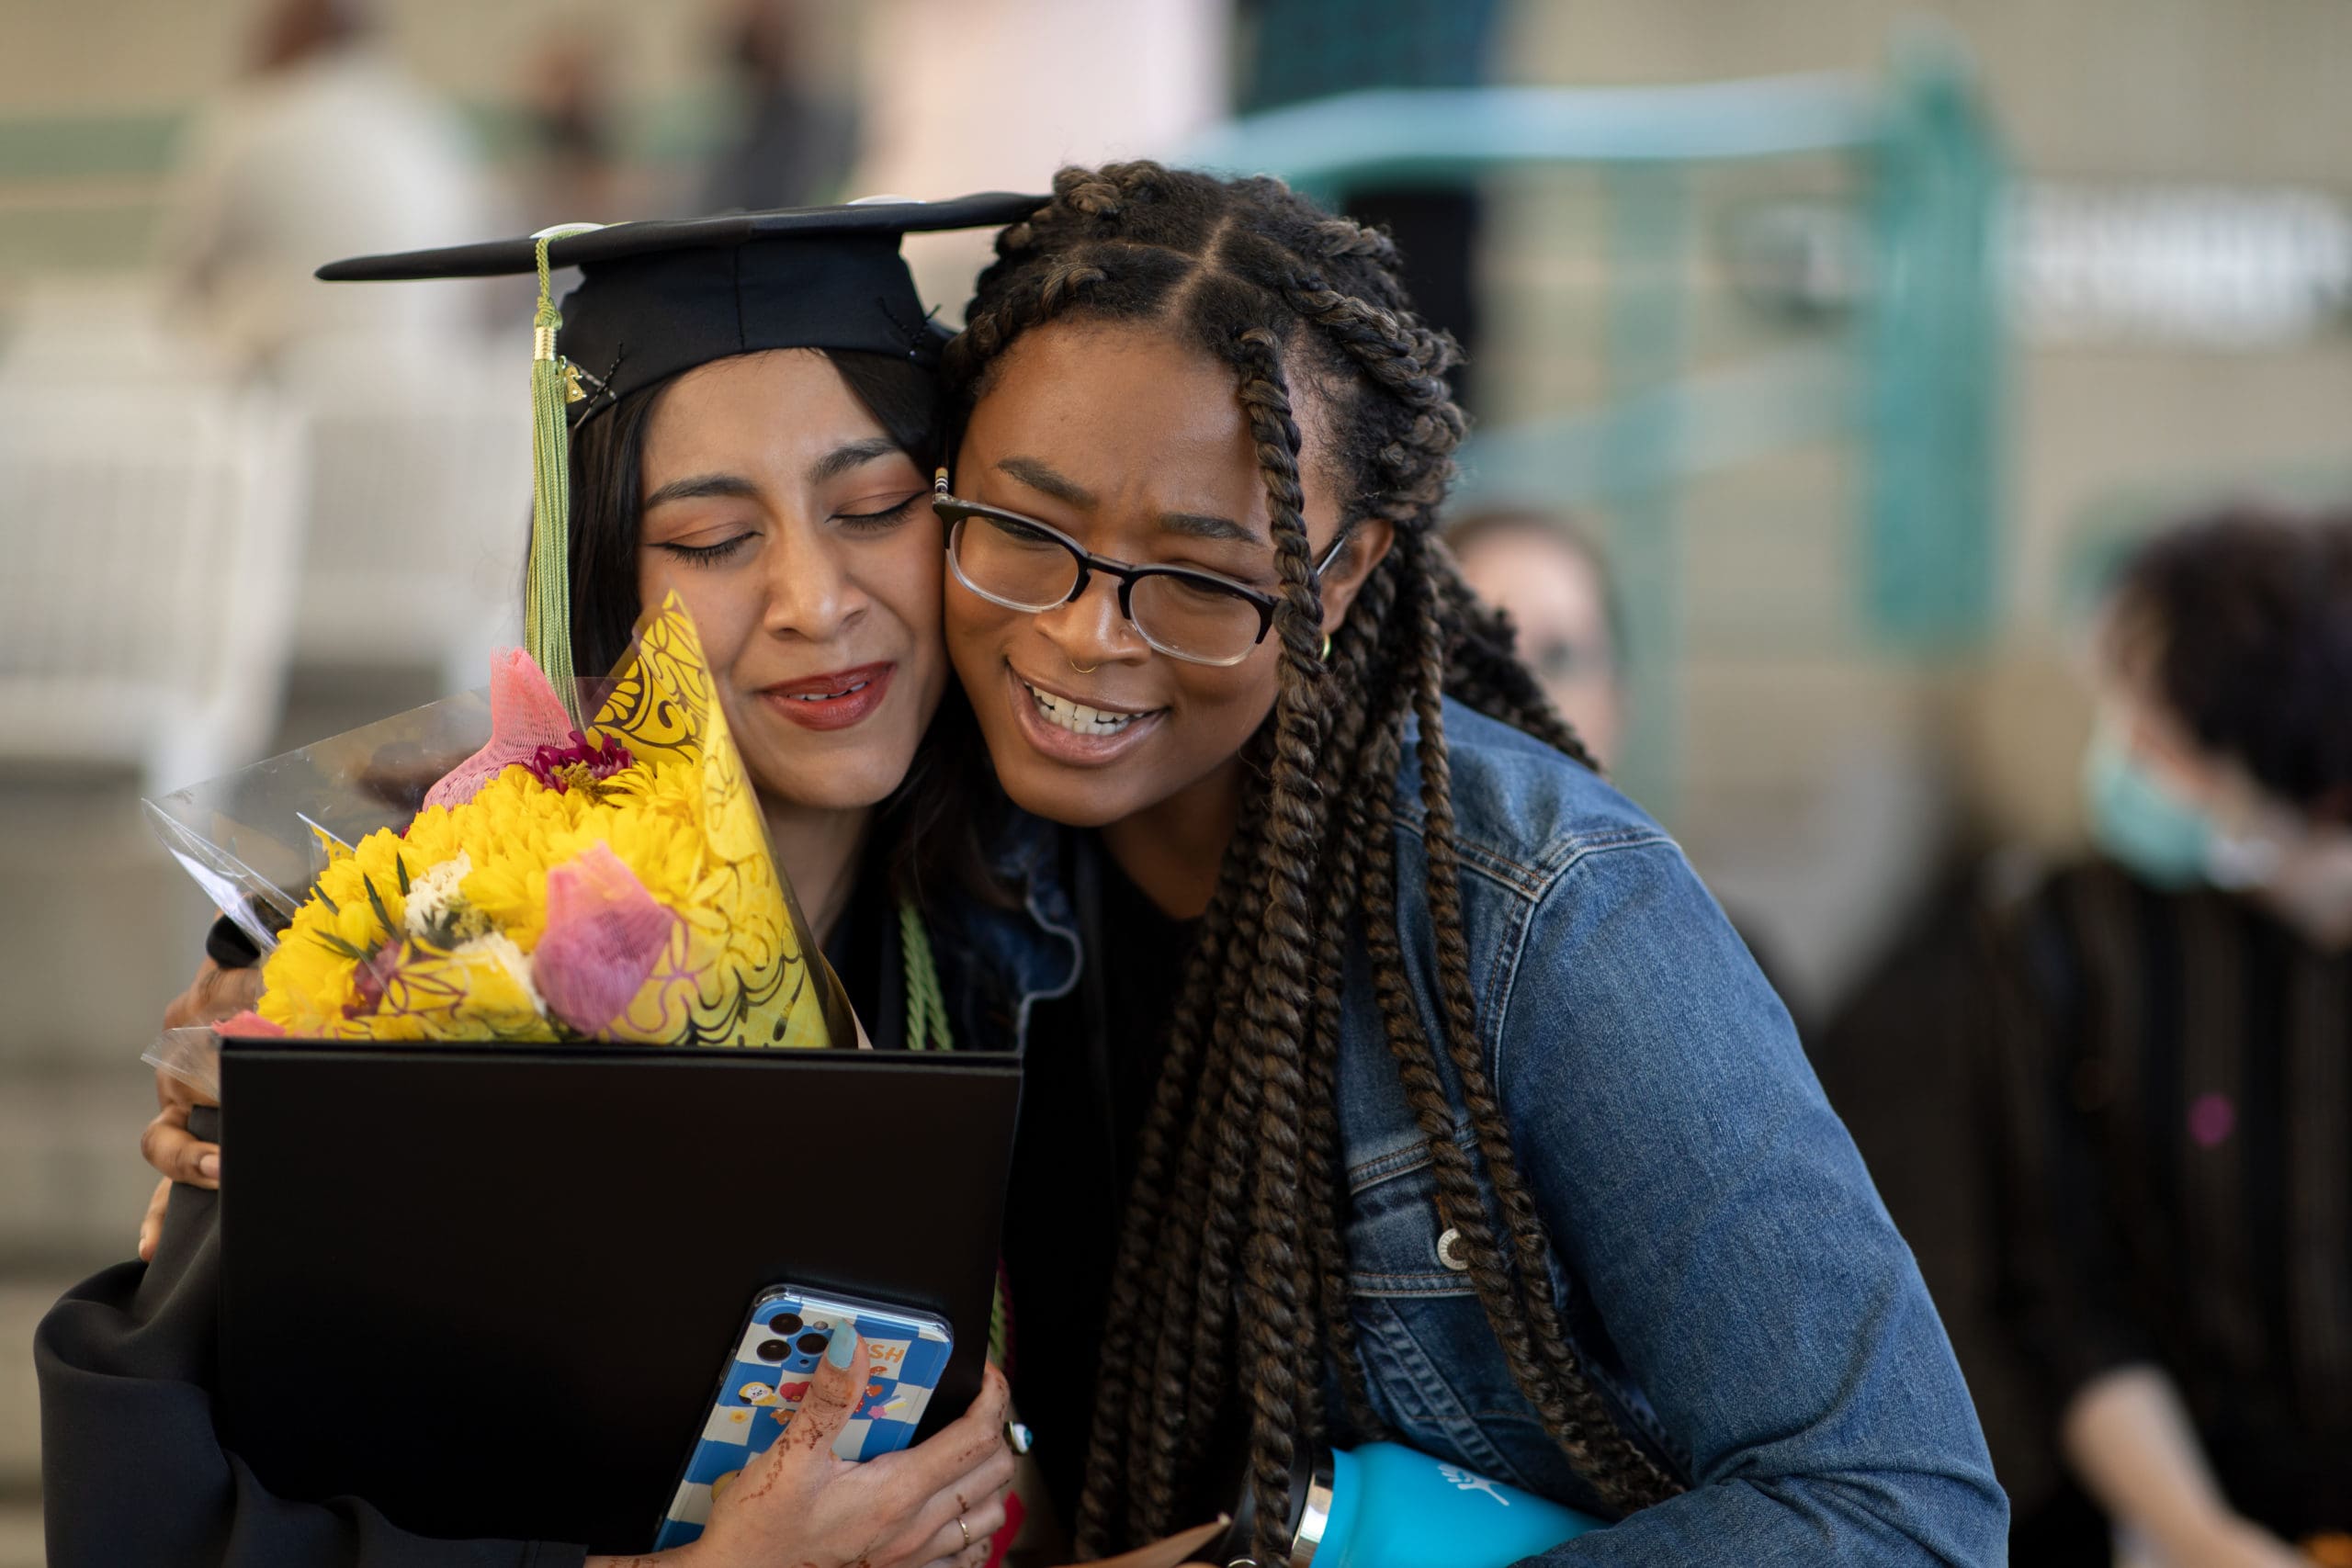 A graduating student hugs a loved one while holding their diploma and a bouquet of yellow and pink flowers.